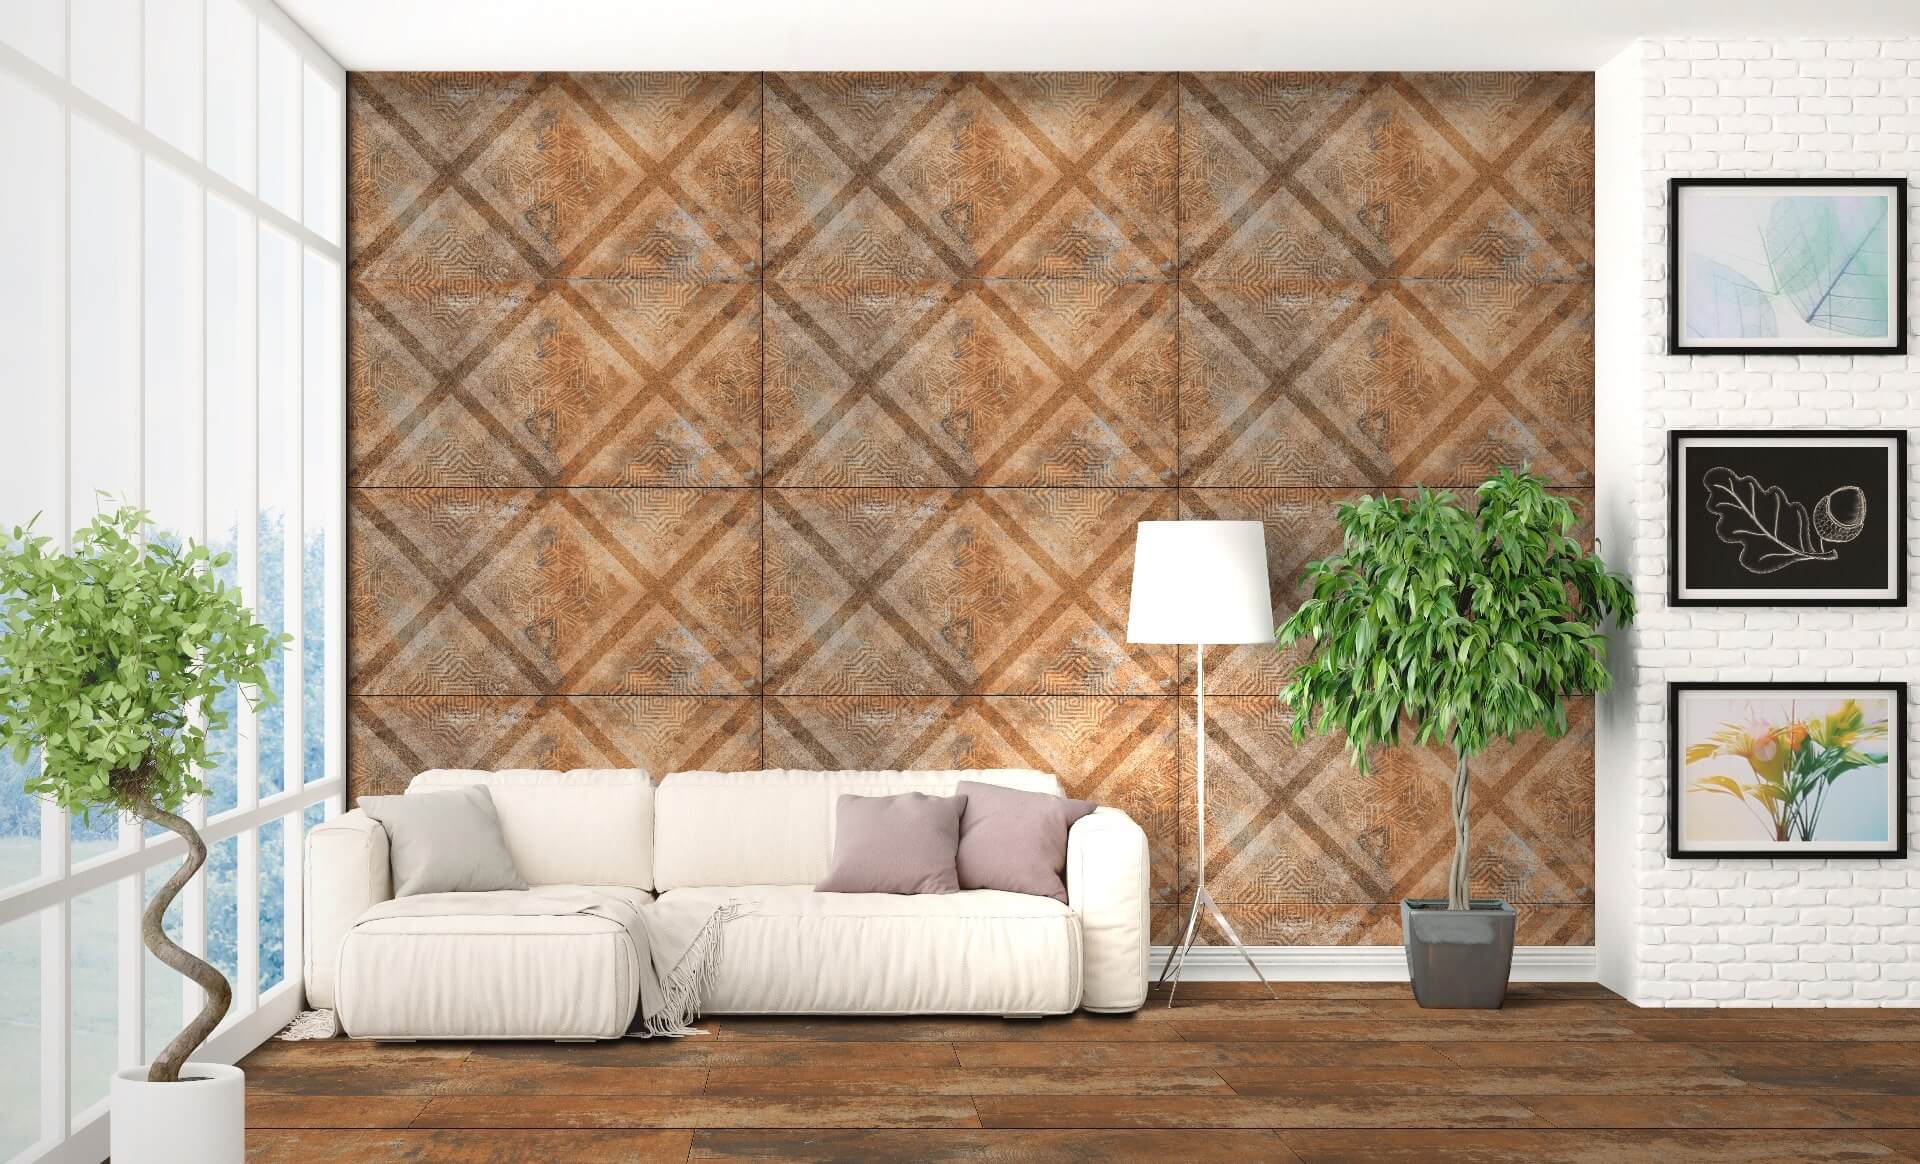 Commercial Tiles for Accent Tiles